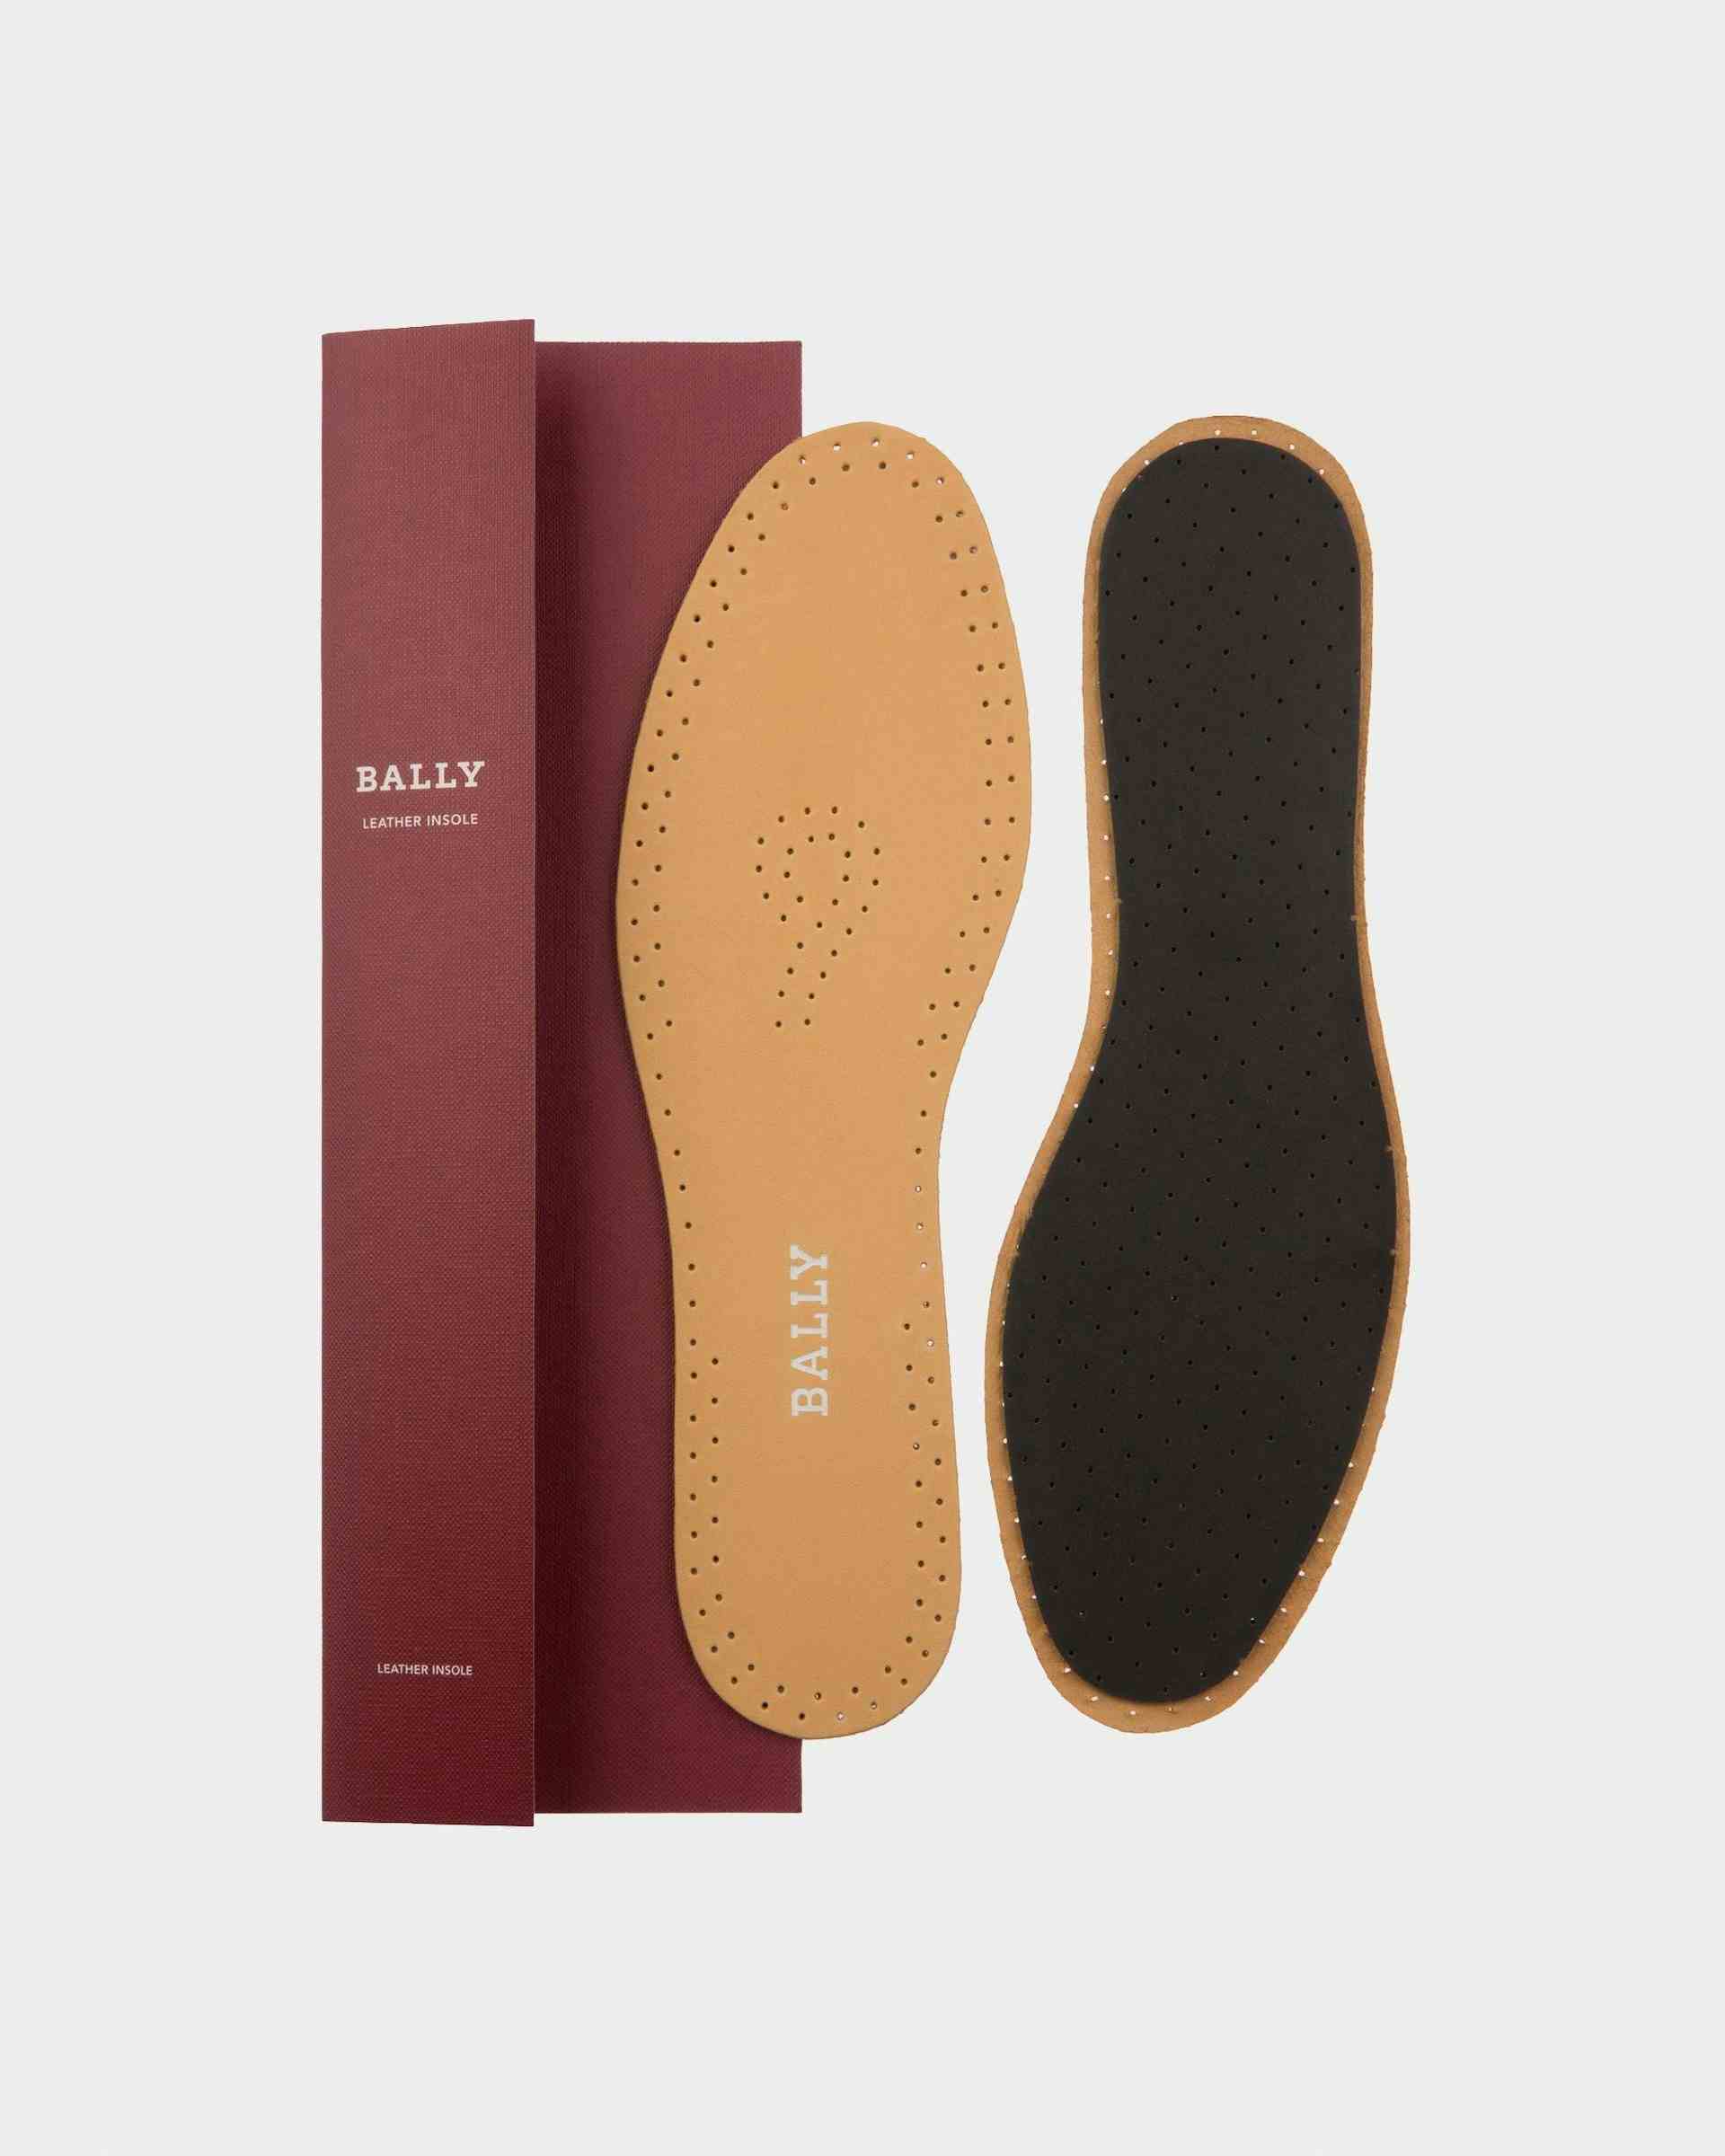 Leather Insole Shoe Care Accessory For All Shoes - Homme - Bally